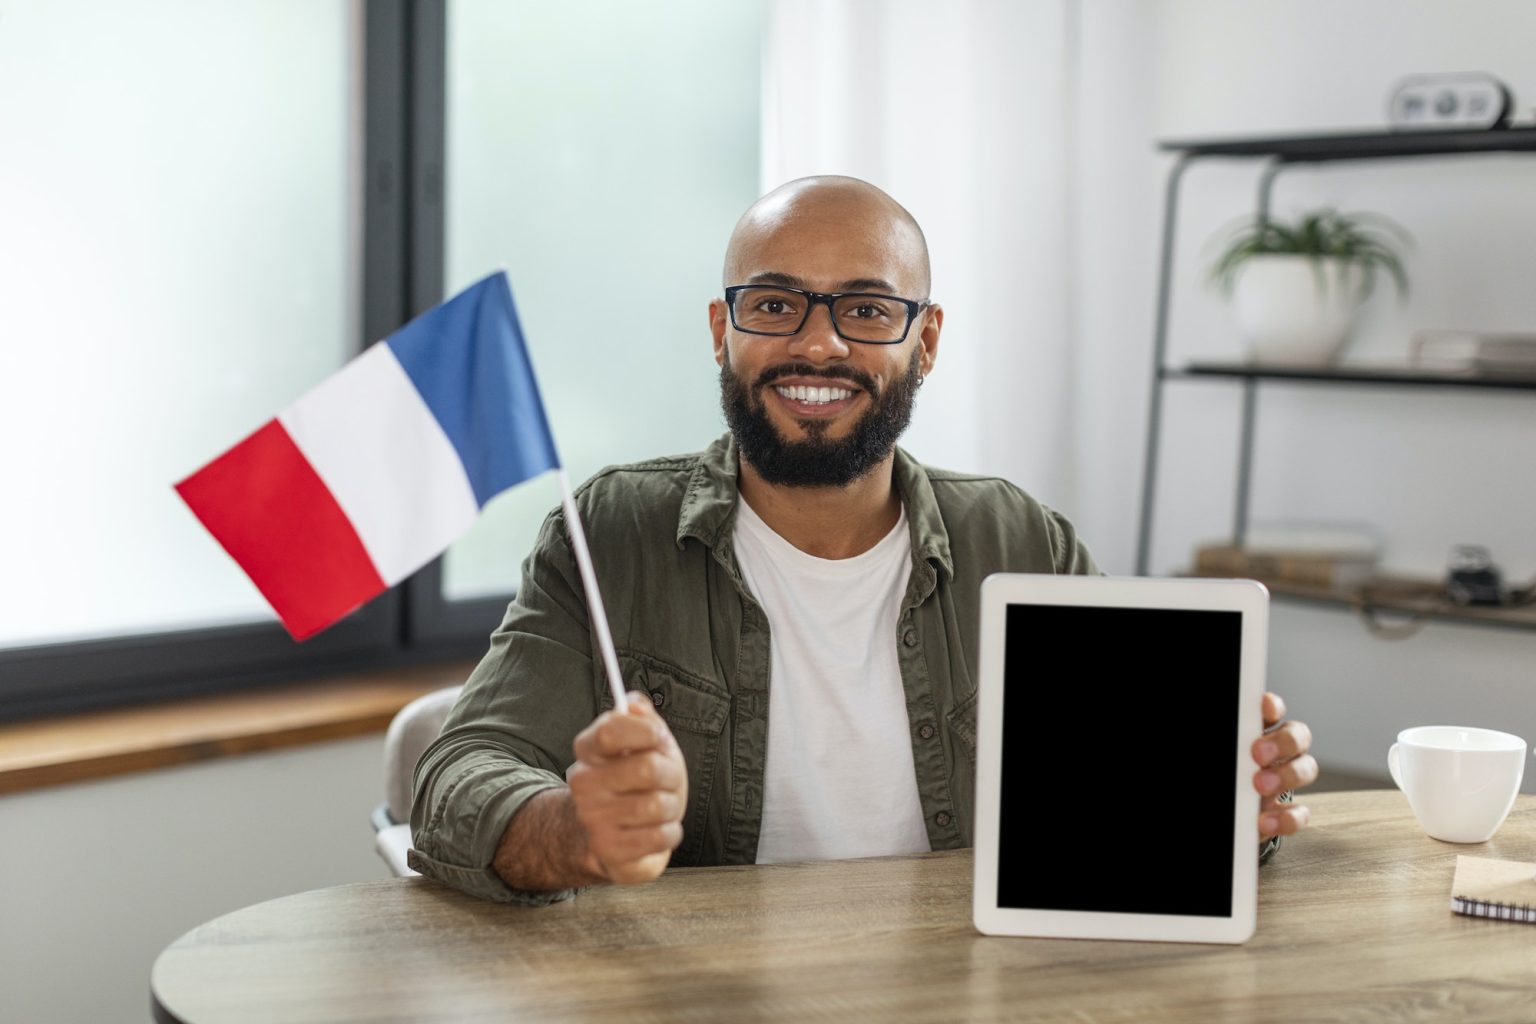 Happy latin man holding flag of France and showing tablet with blank screen, sitting at desk in room